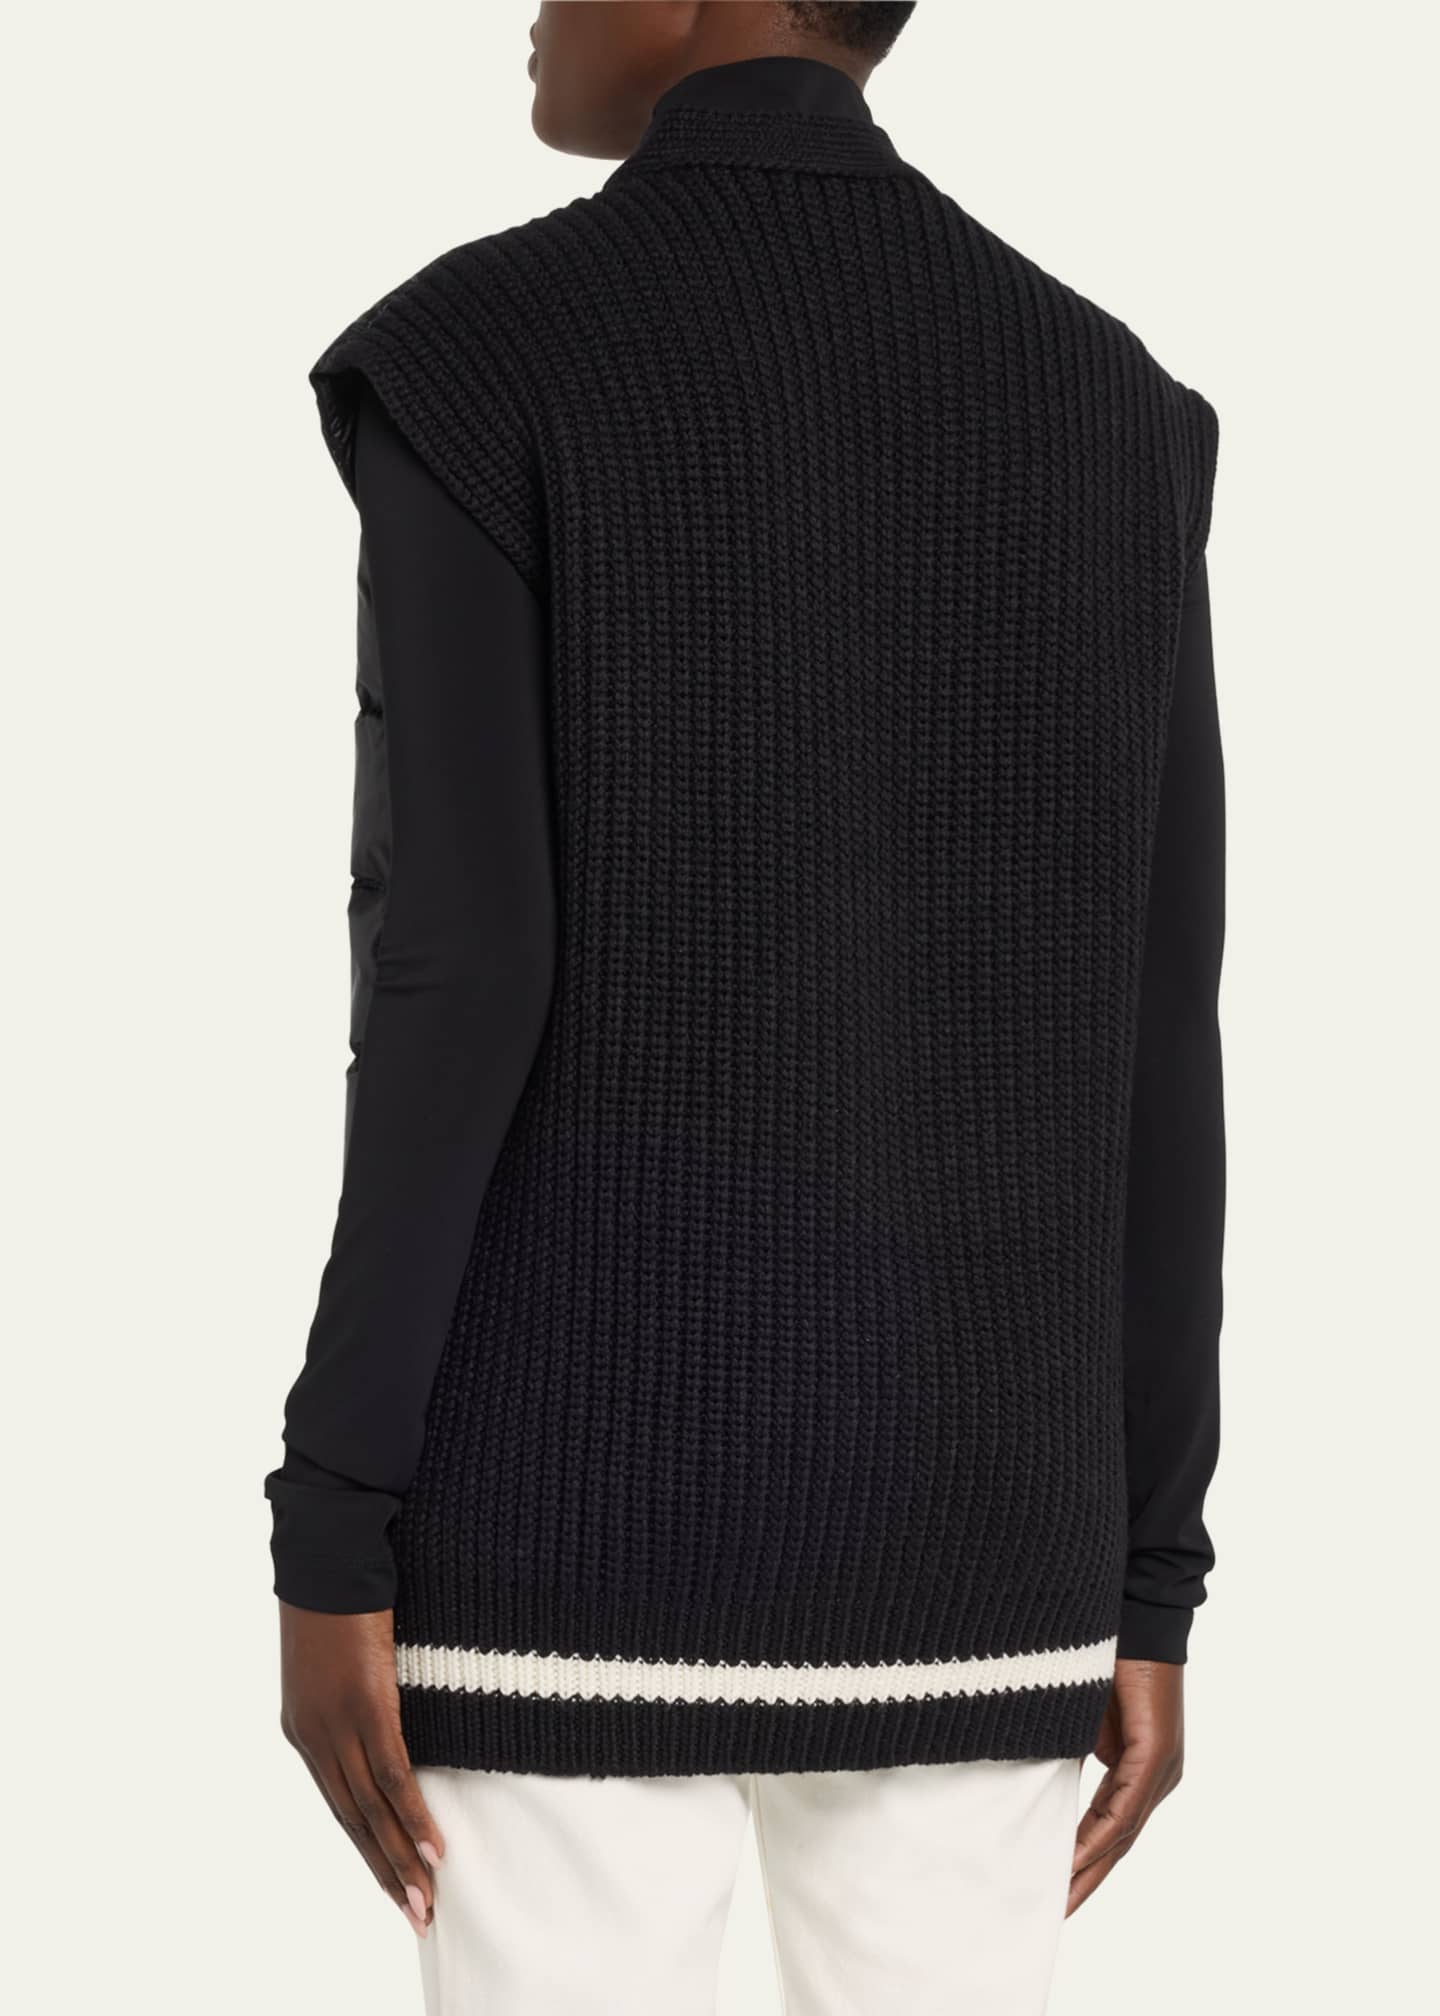 Moncler Puffer Vest with Wool Back - Bergdorf Goodman